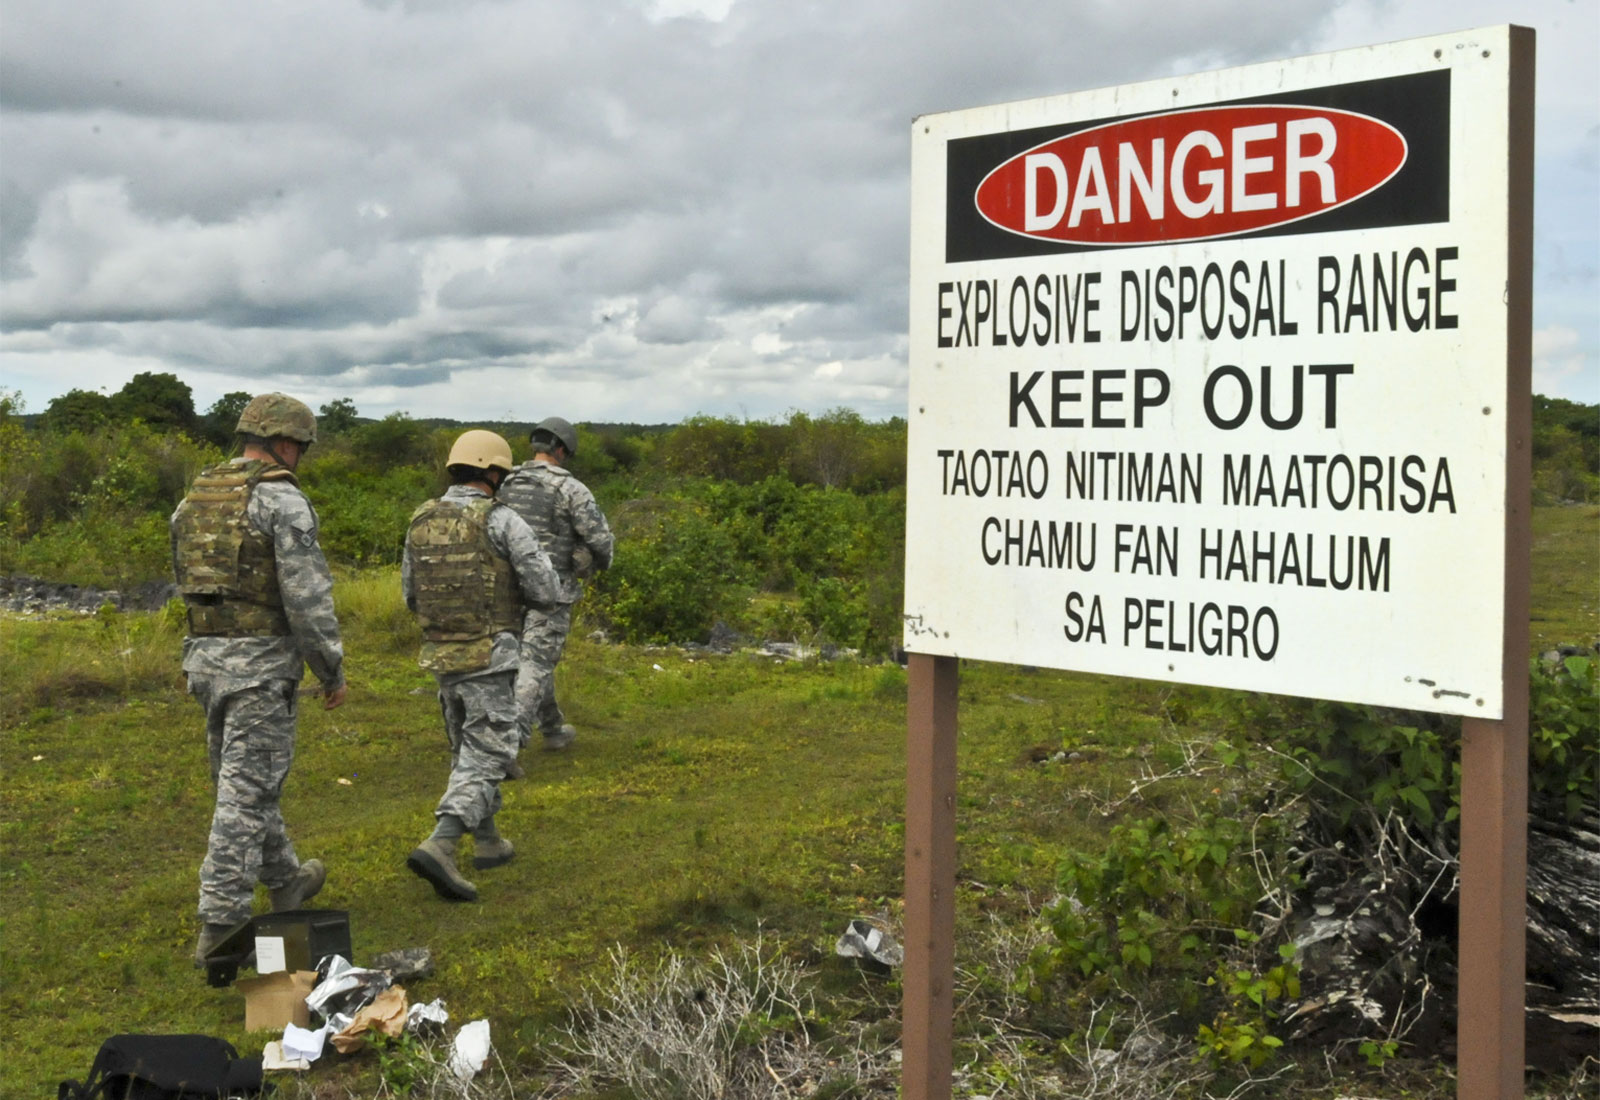 Three people in US Air Force uniforms walking past a sign warning of an explosive disposal range